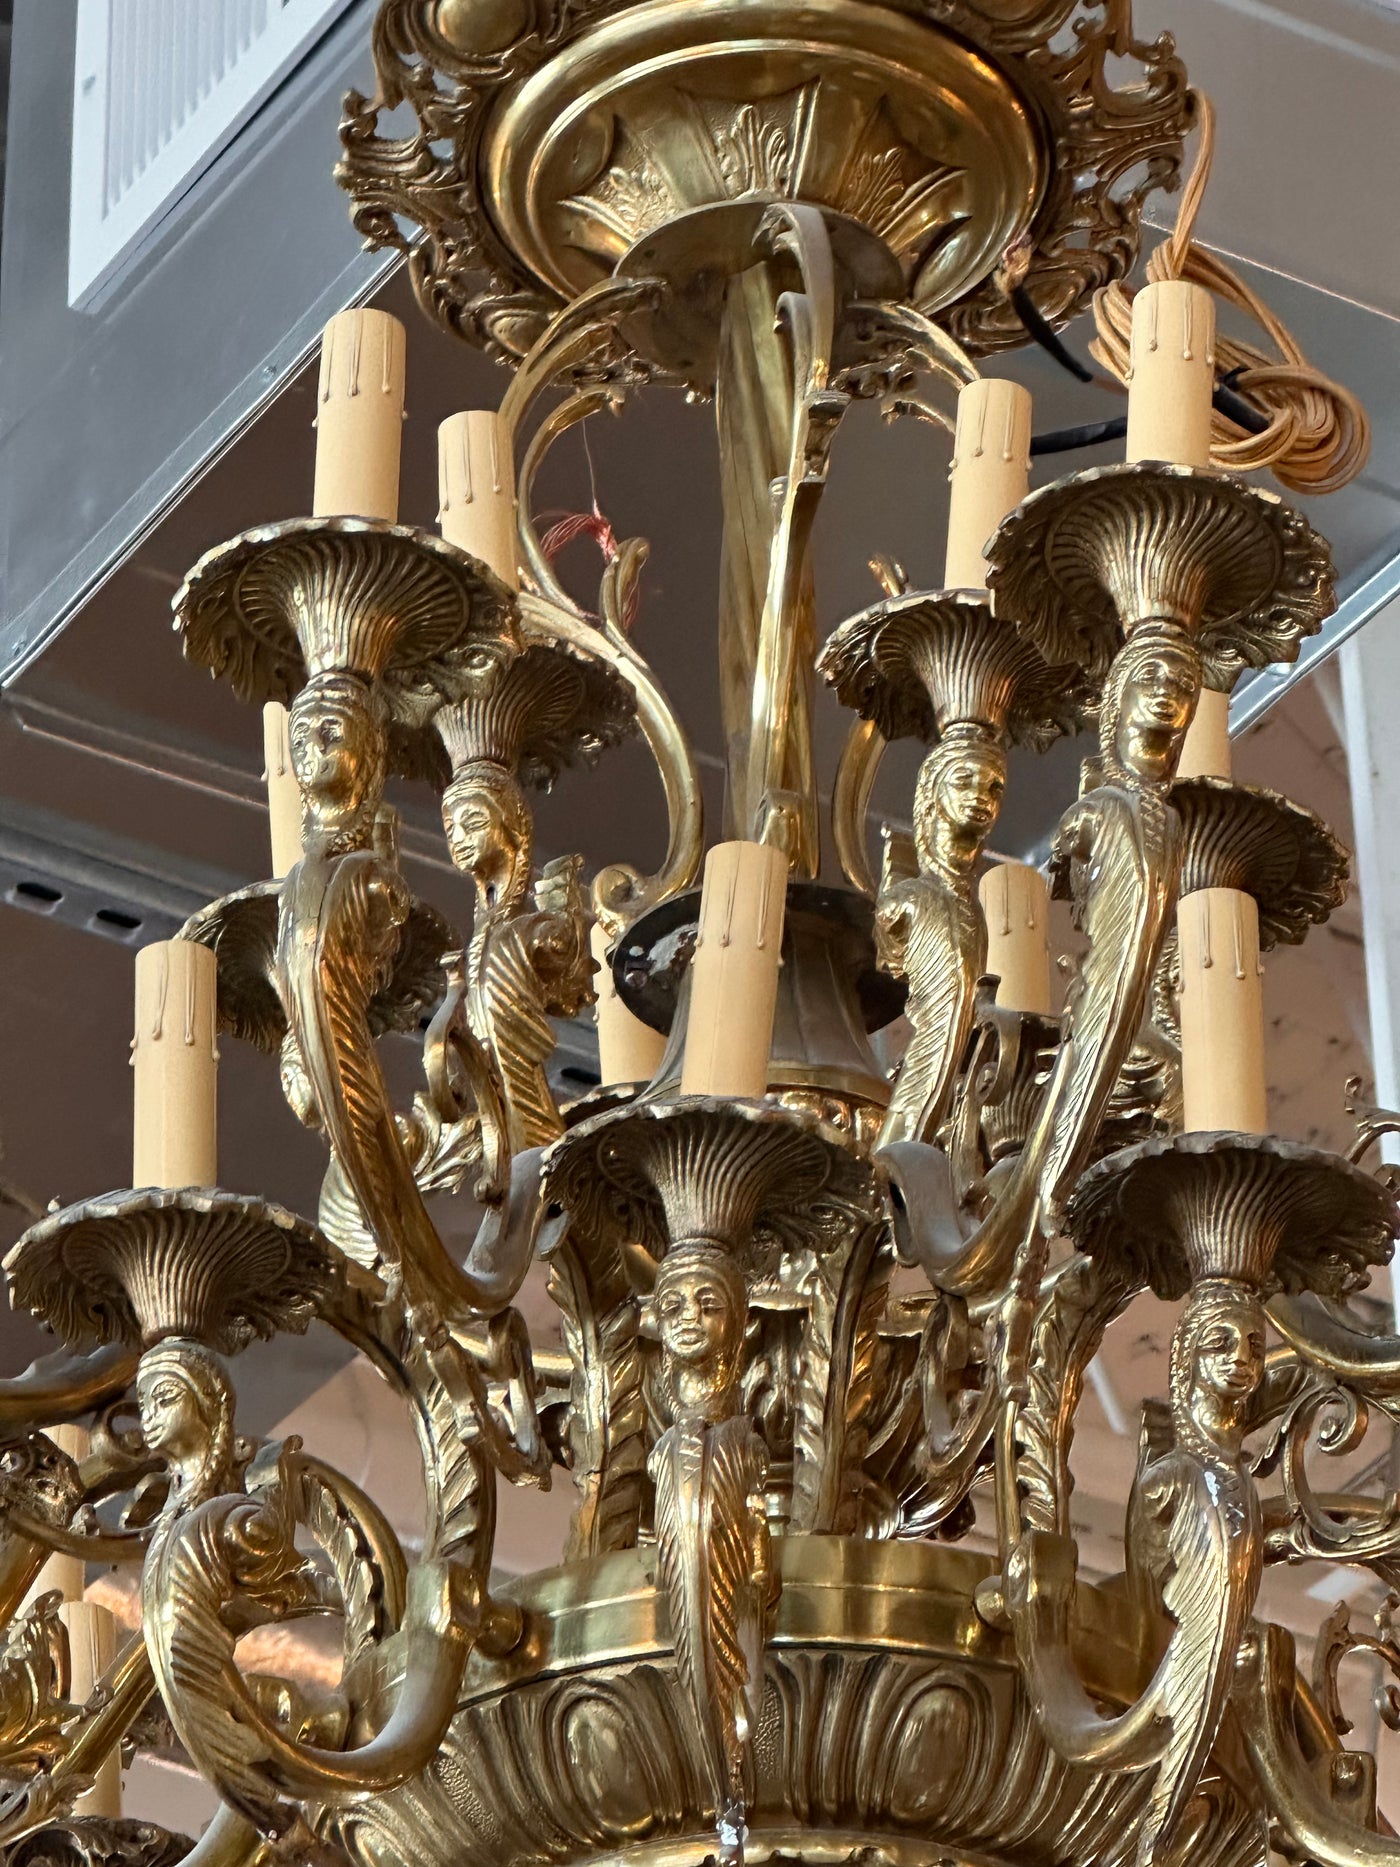 Brass Candle Chandelier